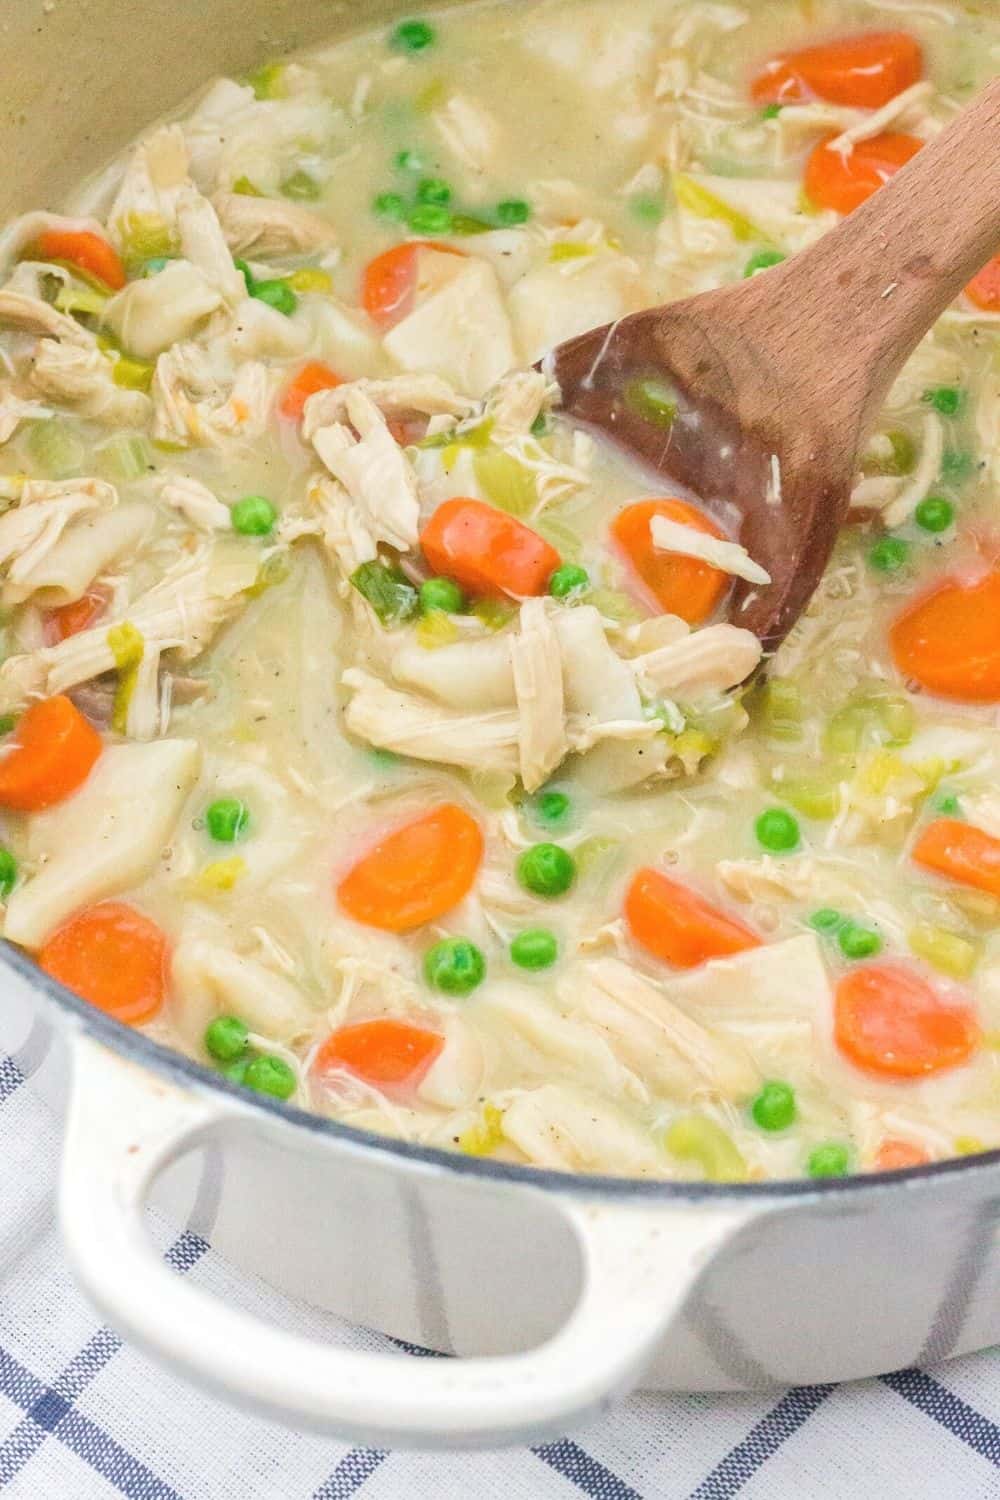 a dutch oven filled with a batch of creamy chicken and dumplings made using flour tortillas. A wooden spoon stirs the dish.